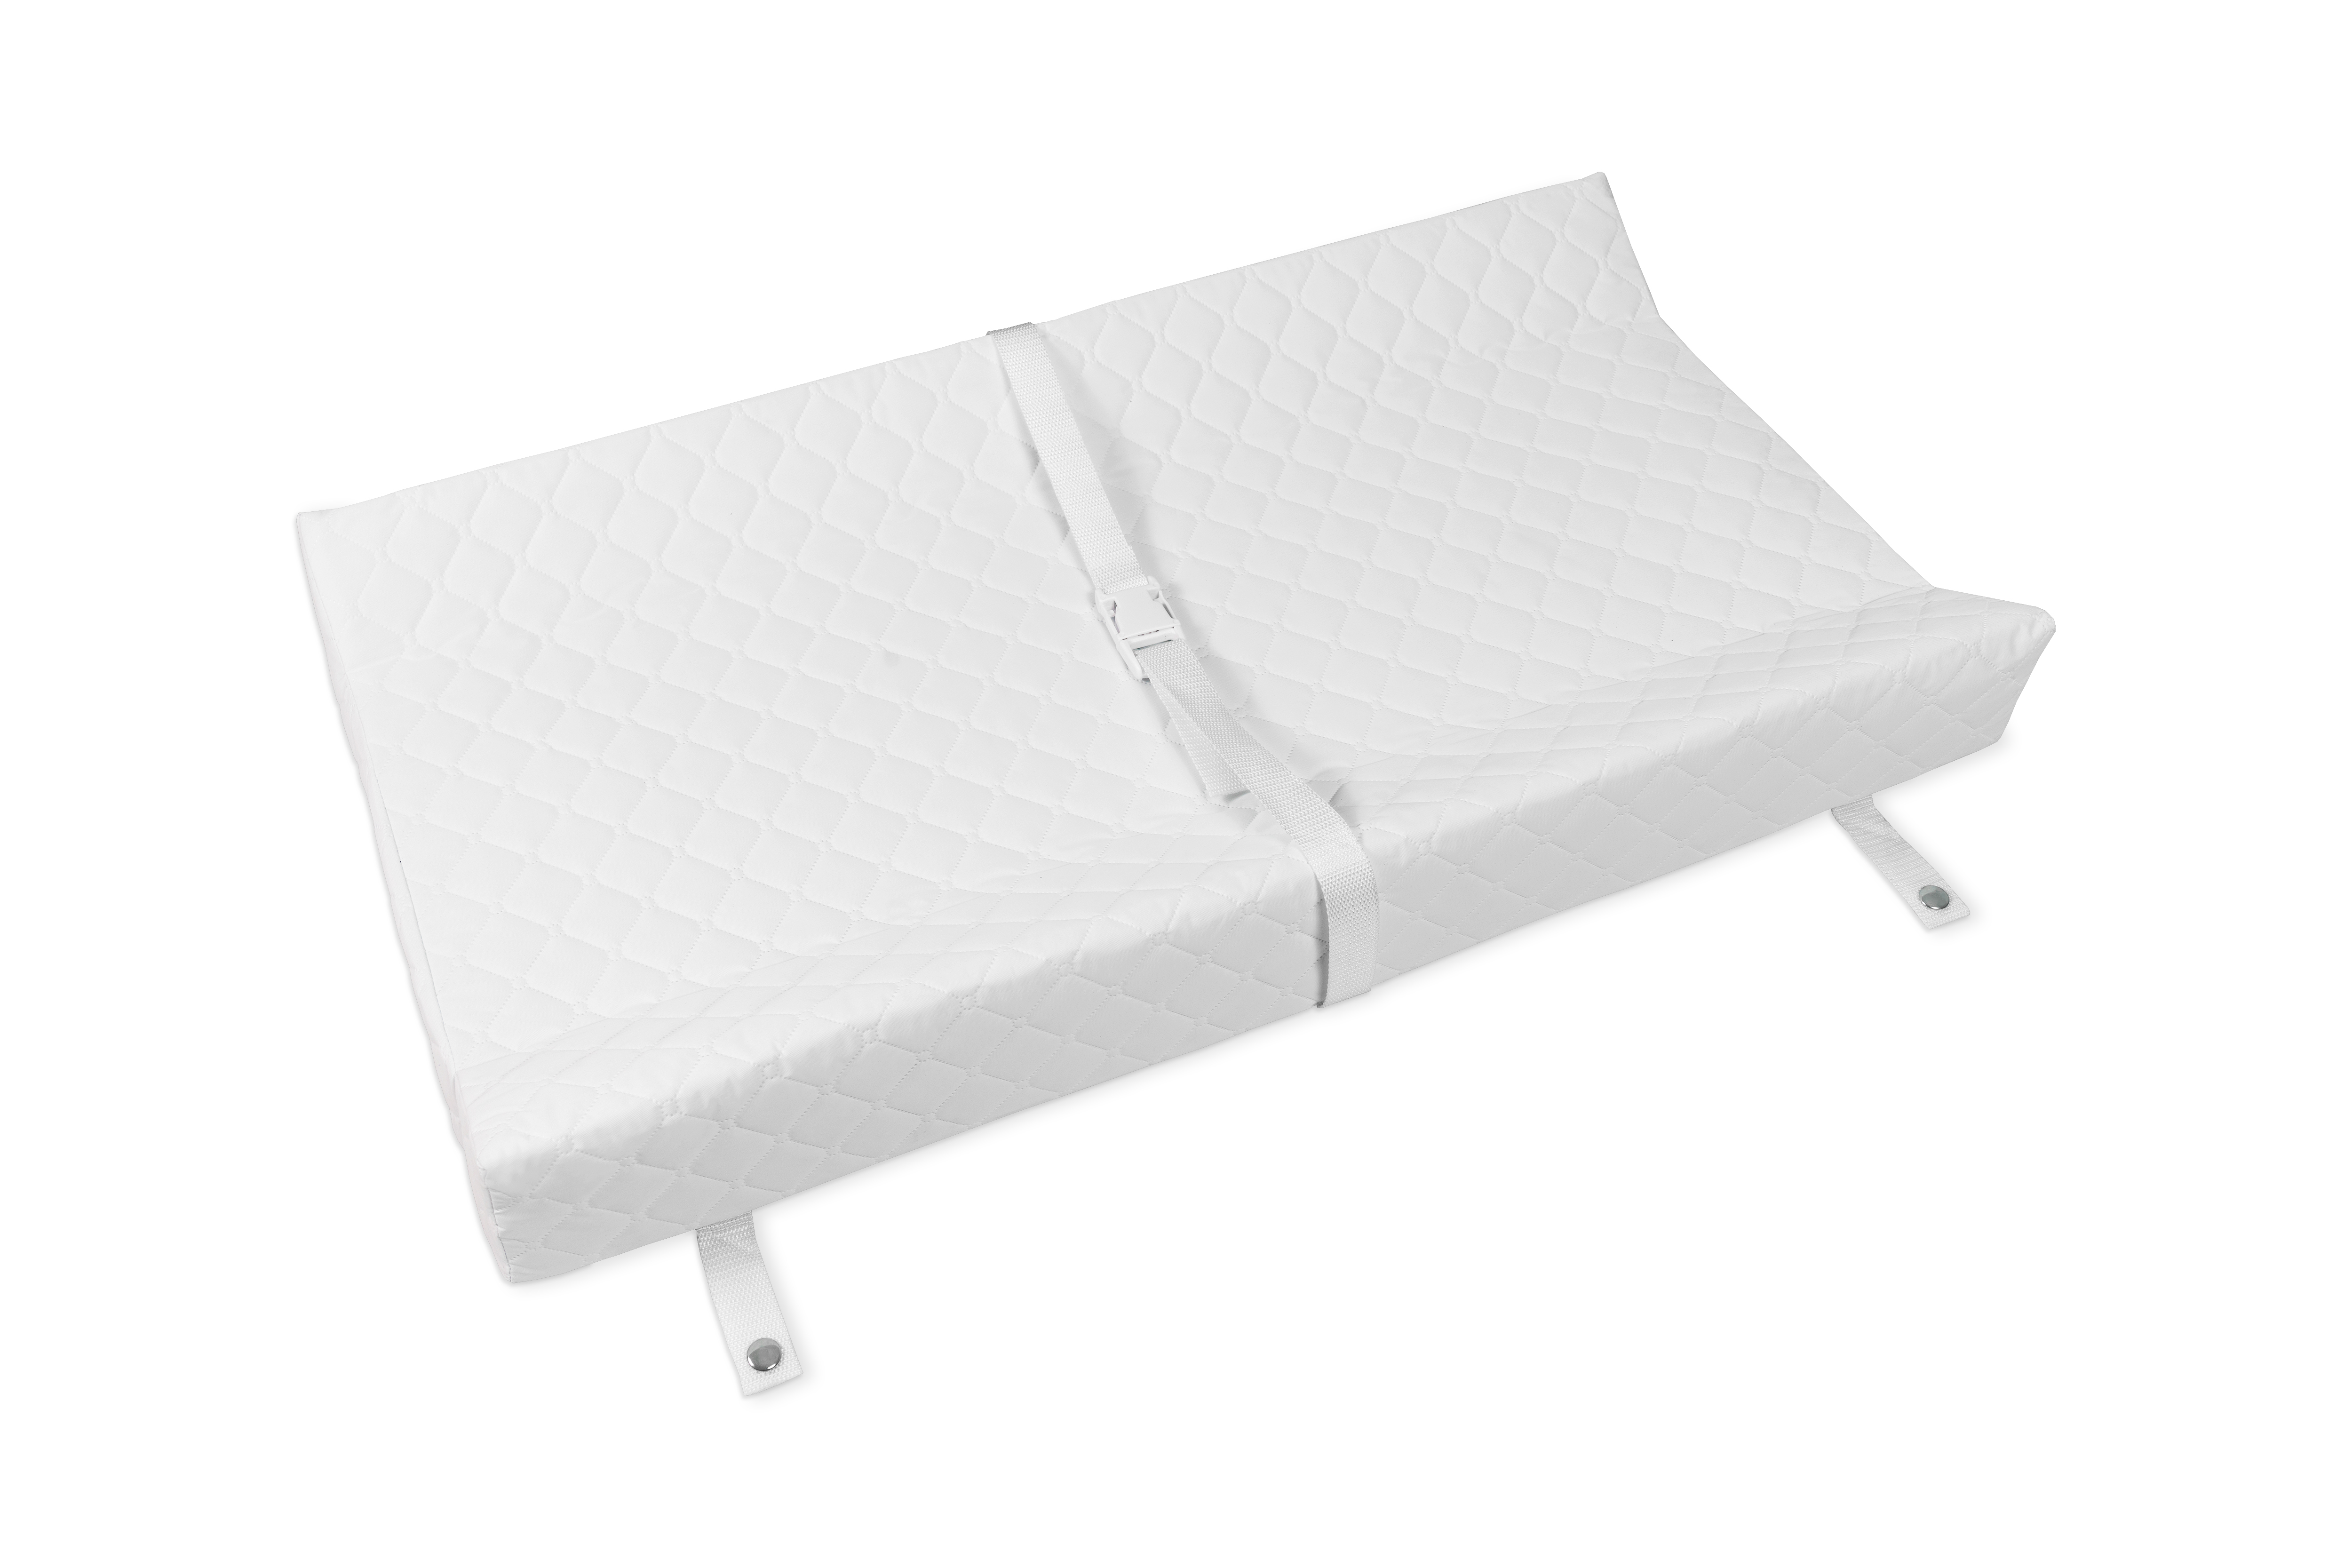 DaVinci 31" Contour Changing Pad for Changer Tray - image 3 of 5